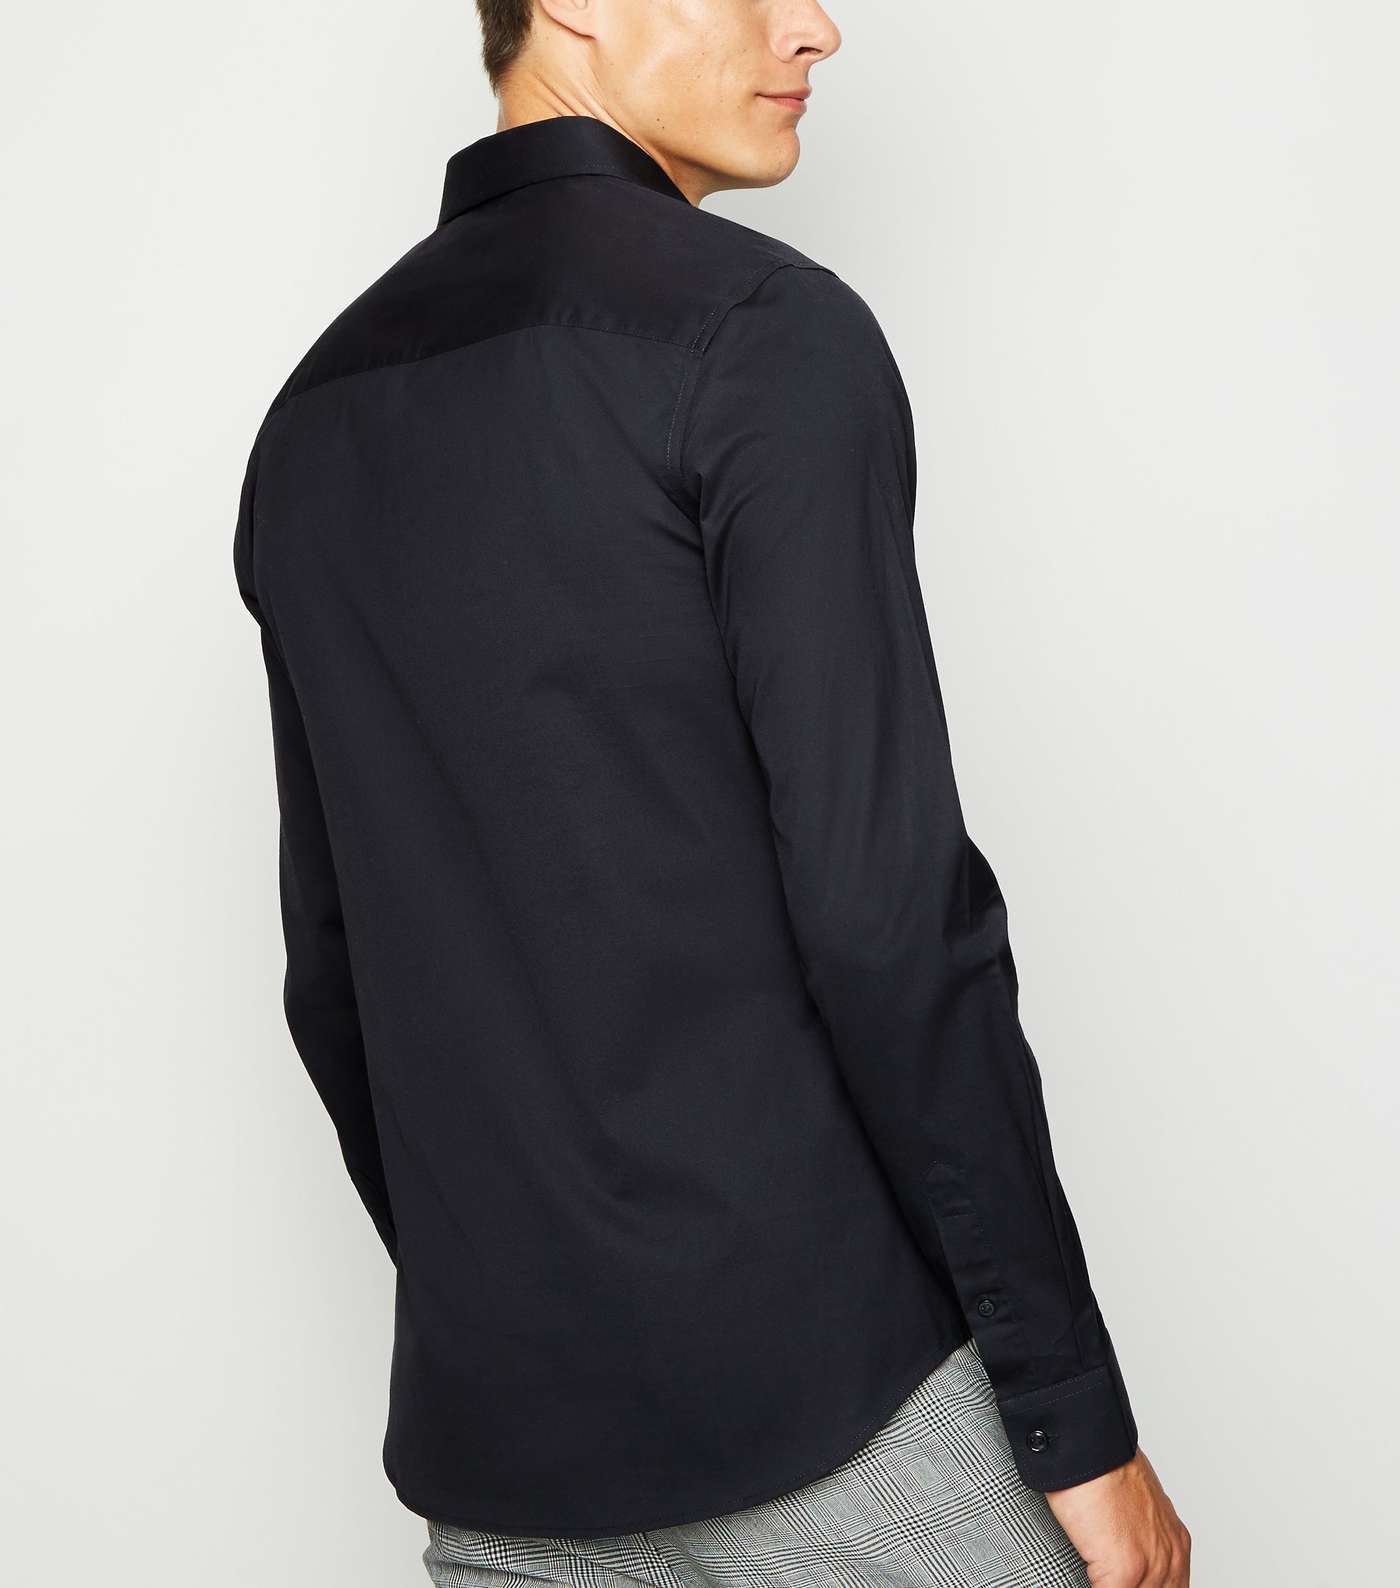 Black Long Sleeve Muscle Fit Shirt Image 3